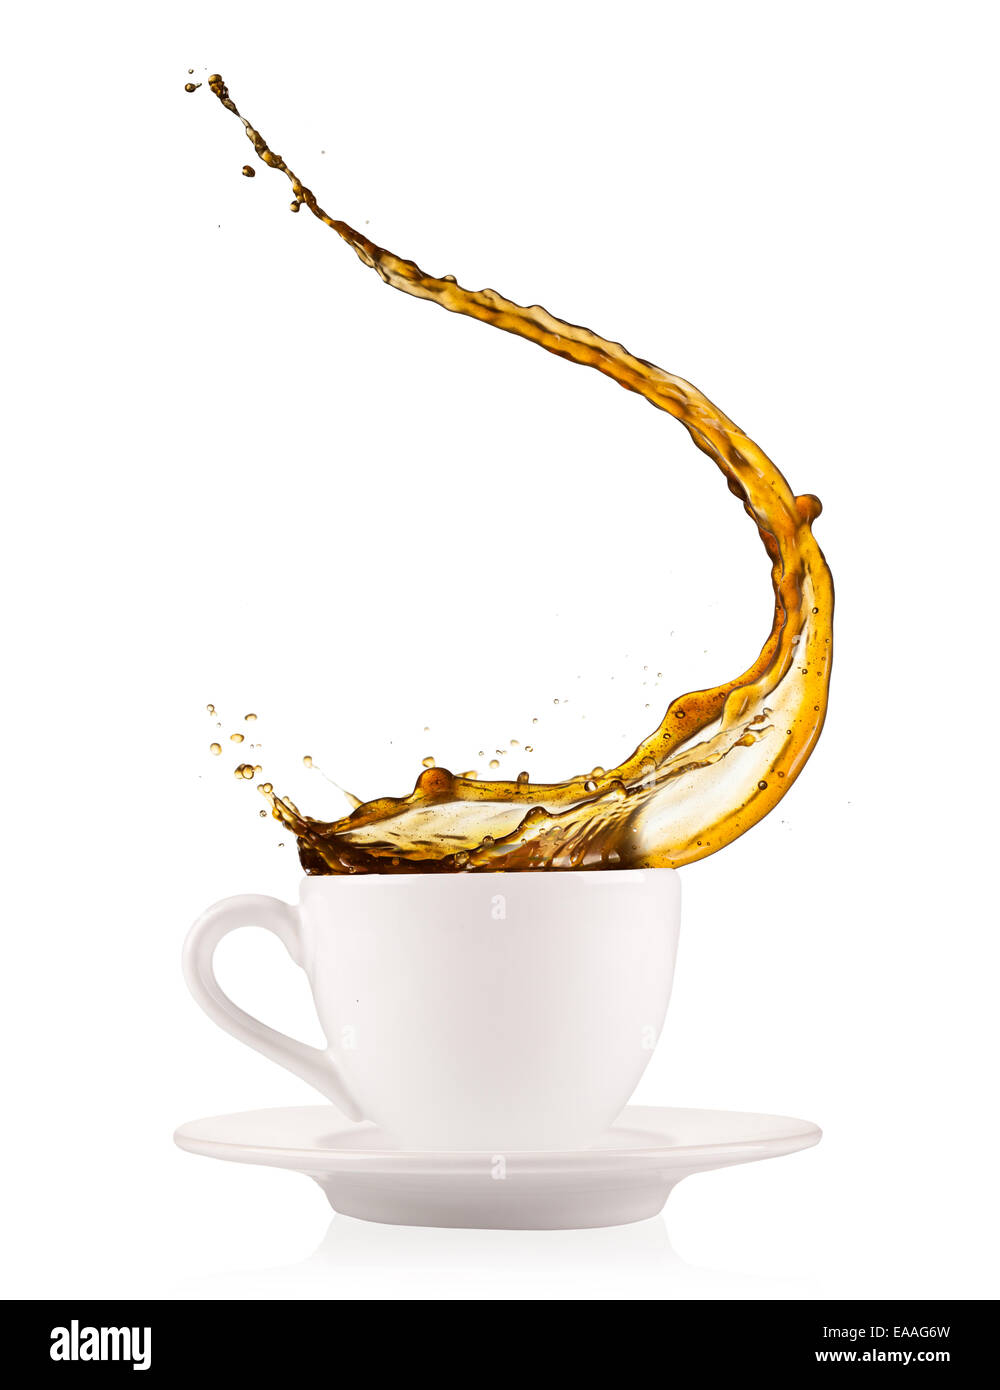 https://c8.alamy.com/comp/EAAG6W/coffee-splashing-out-of-cup-isolated-on-white-background-EAAG6W.jpg